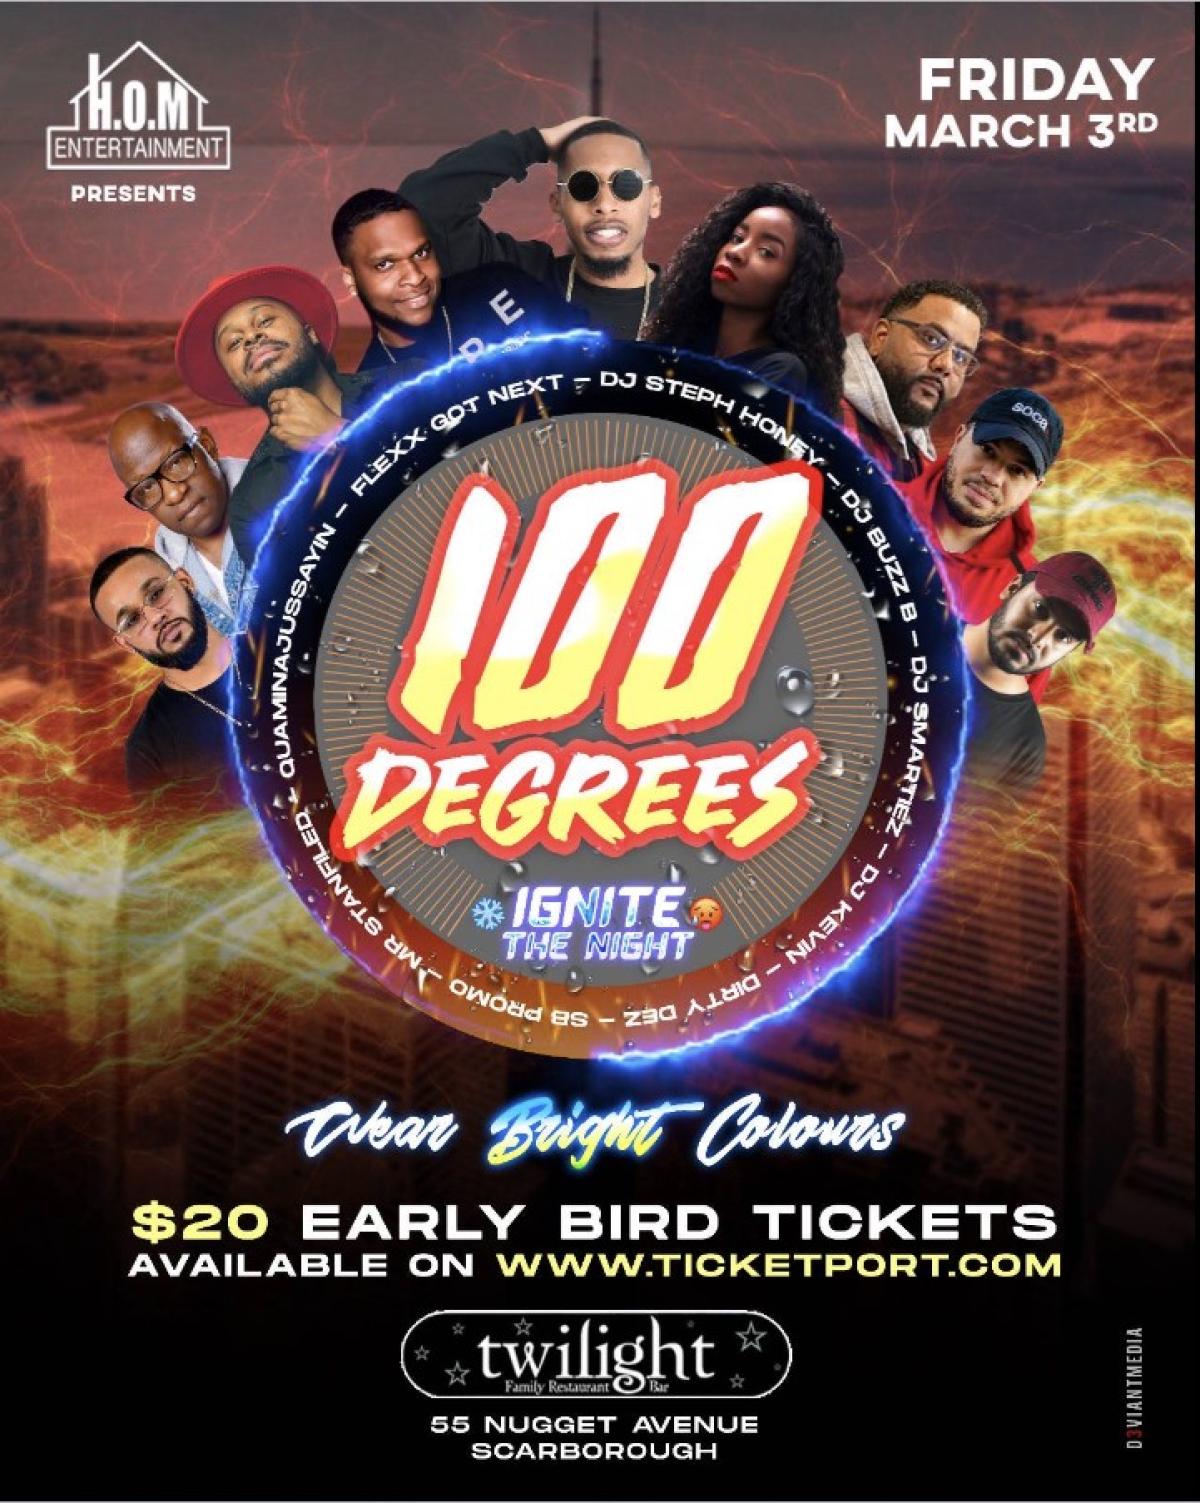 100 Degrees - The Bright Colour Edition flyer or graphic.